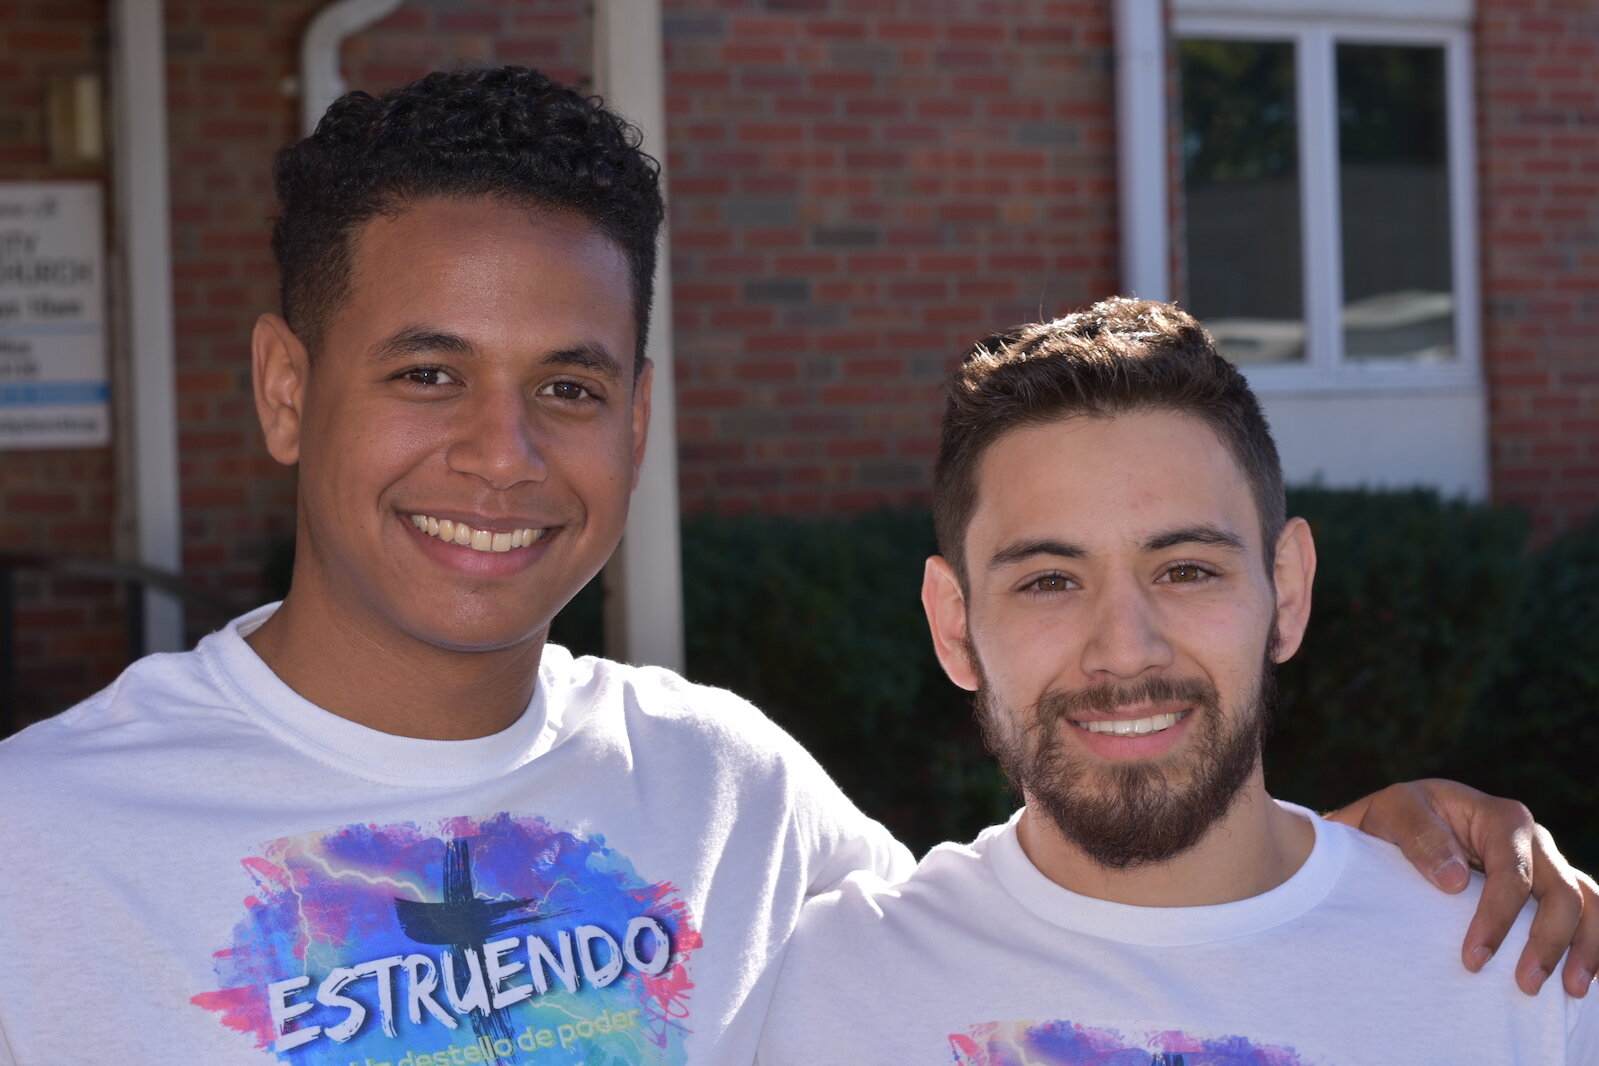 Jeffery Tavarez and Agustin Leal-Diaz co-fundadores de Estruendo, a group a group to help students and other youth who may be contemplating suicide.